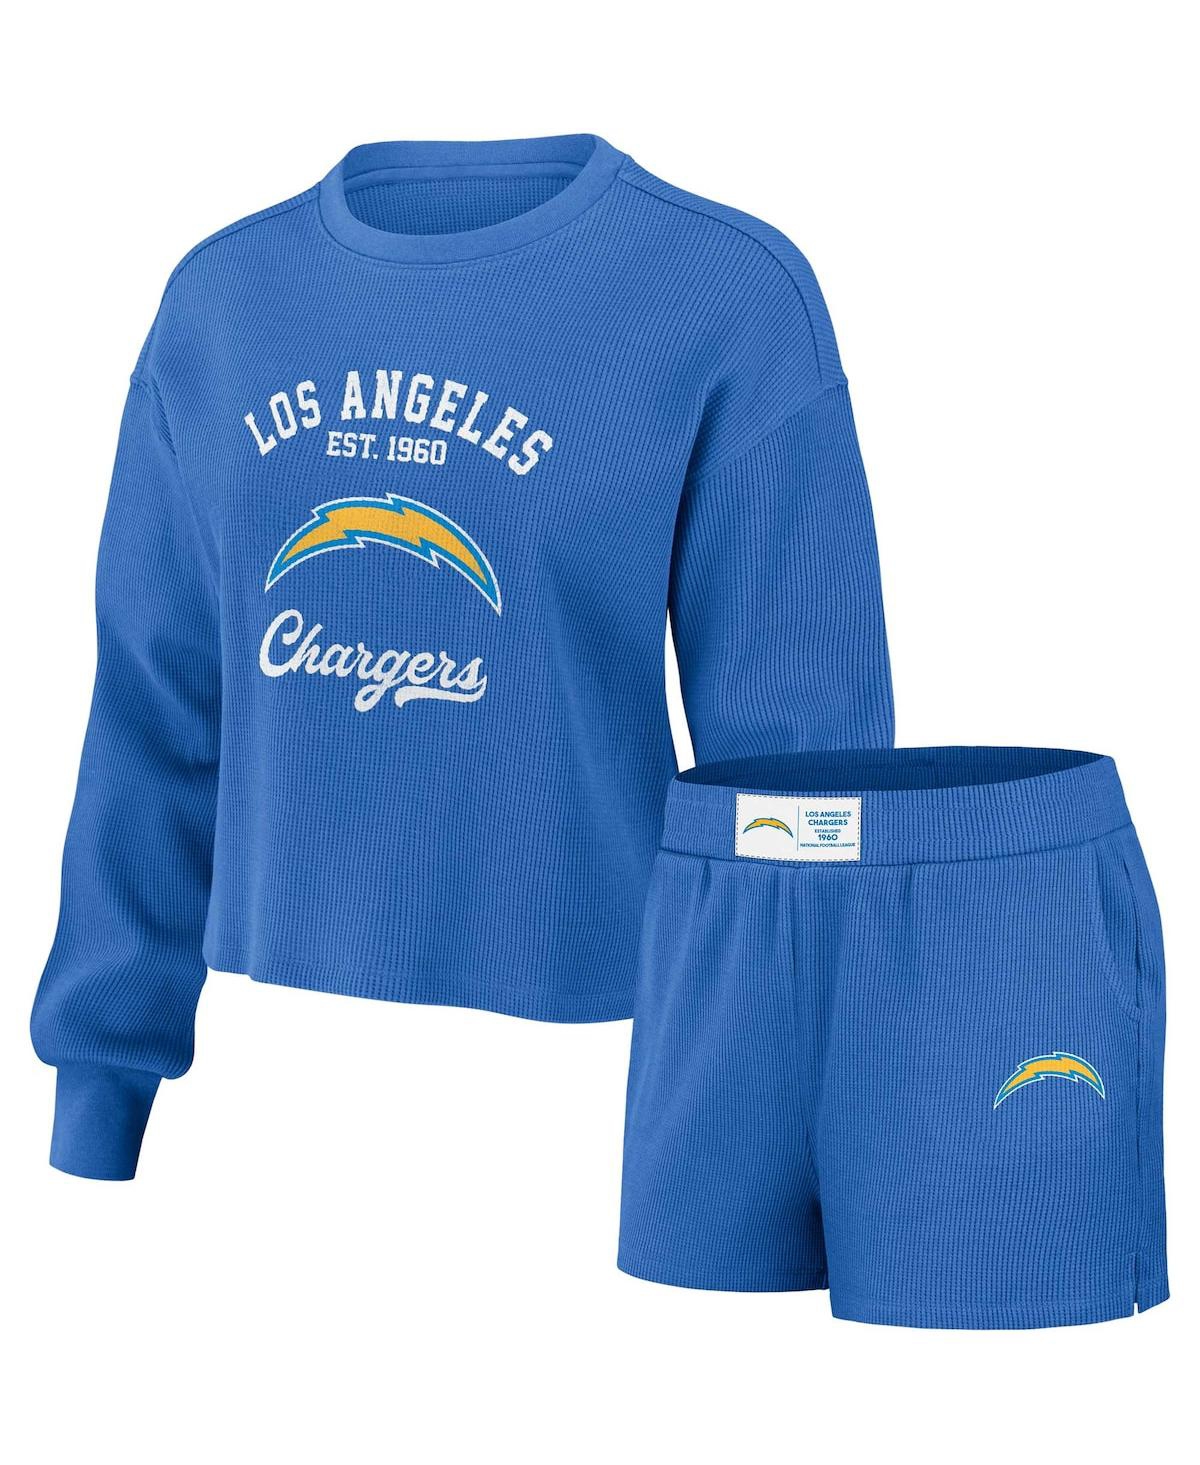 Shop Wear By Erin Andrews Women's  Blue Distressed Los Angeles Chargers Waffle Knit Long Sleeve T-shirt An